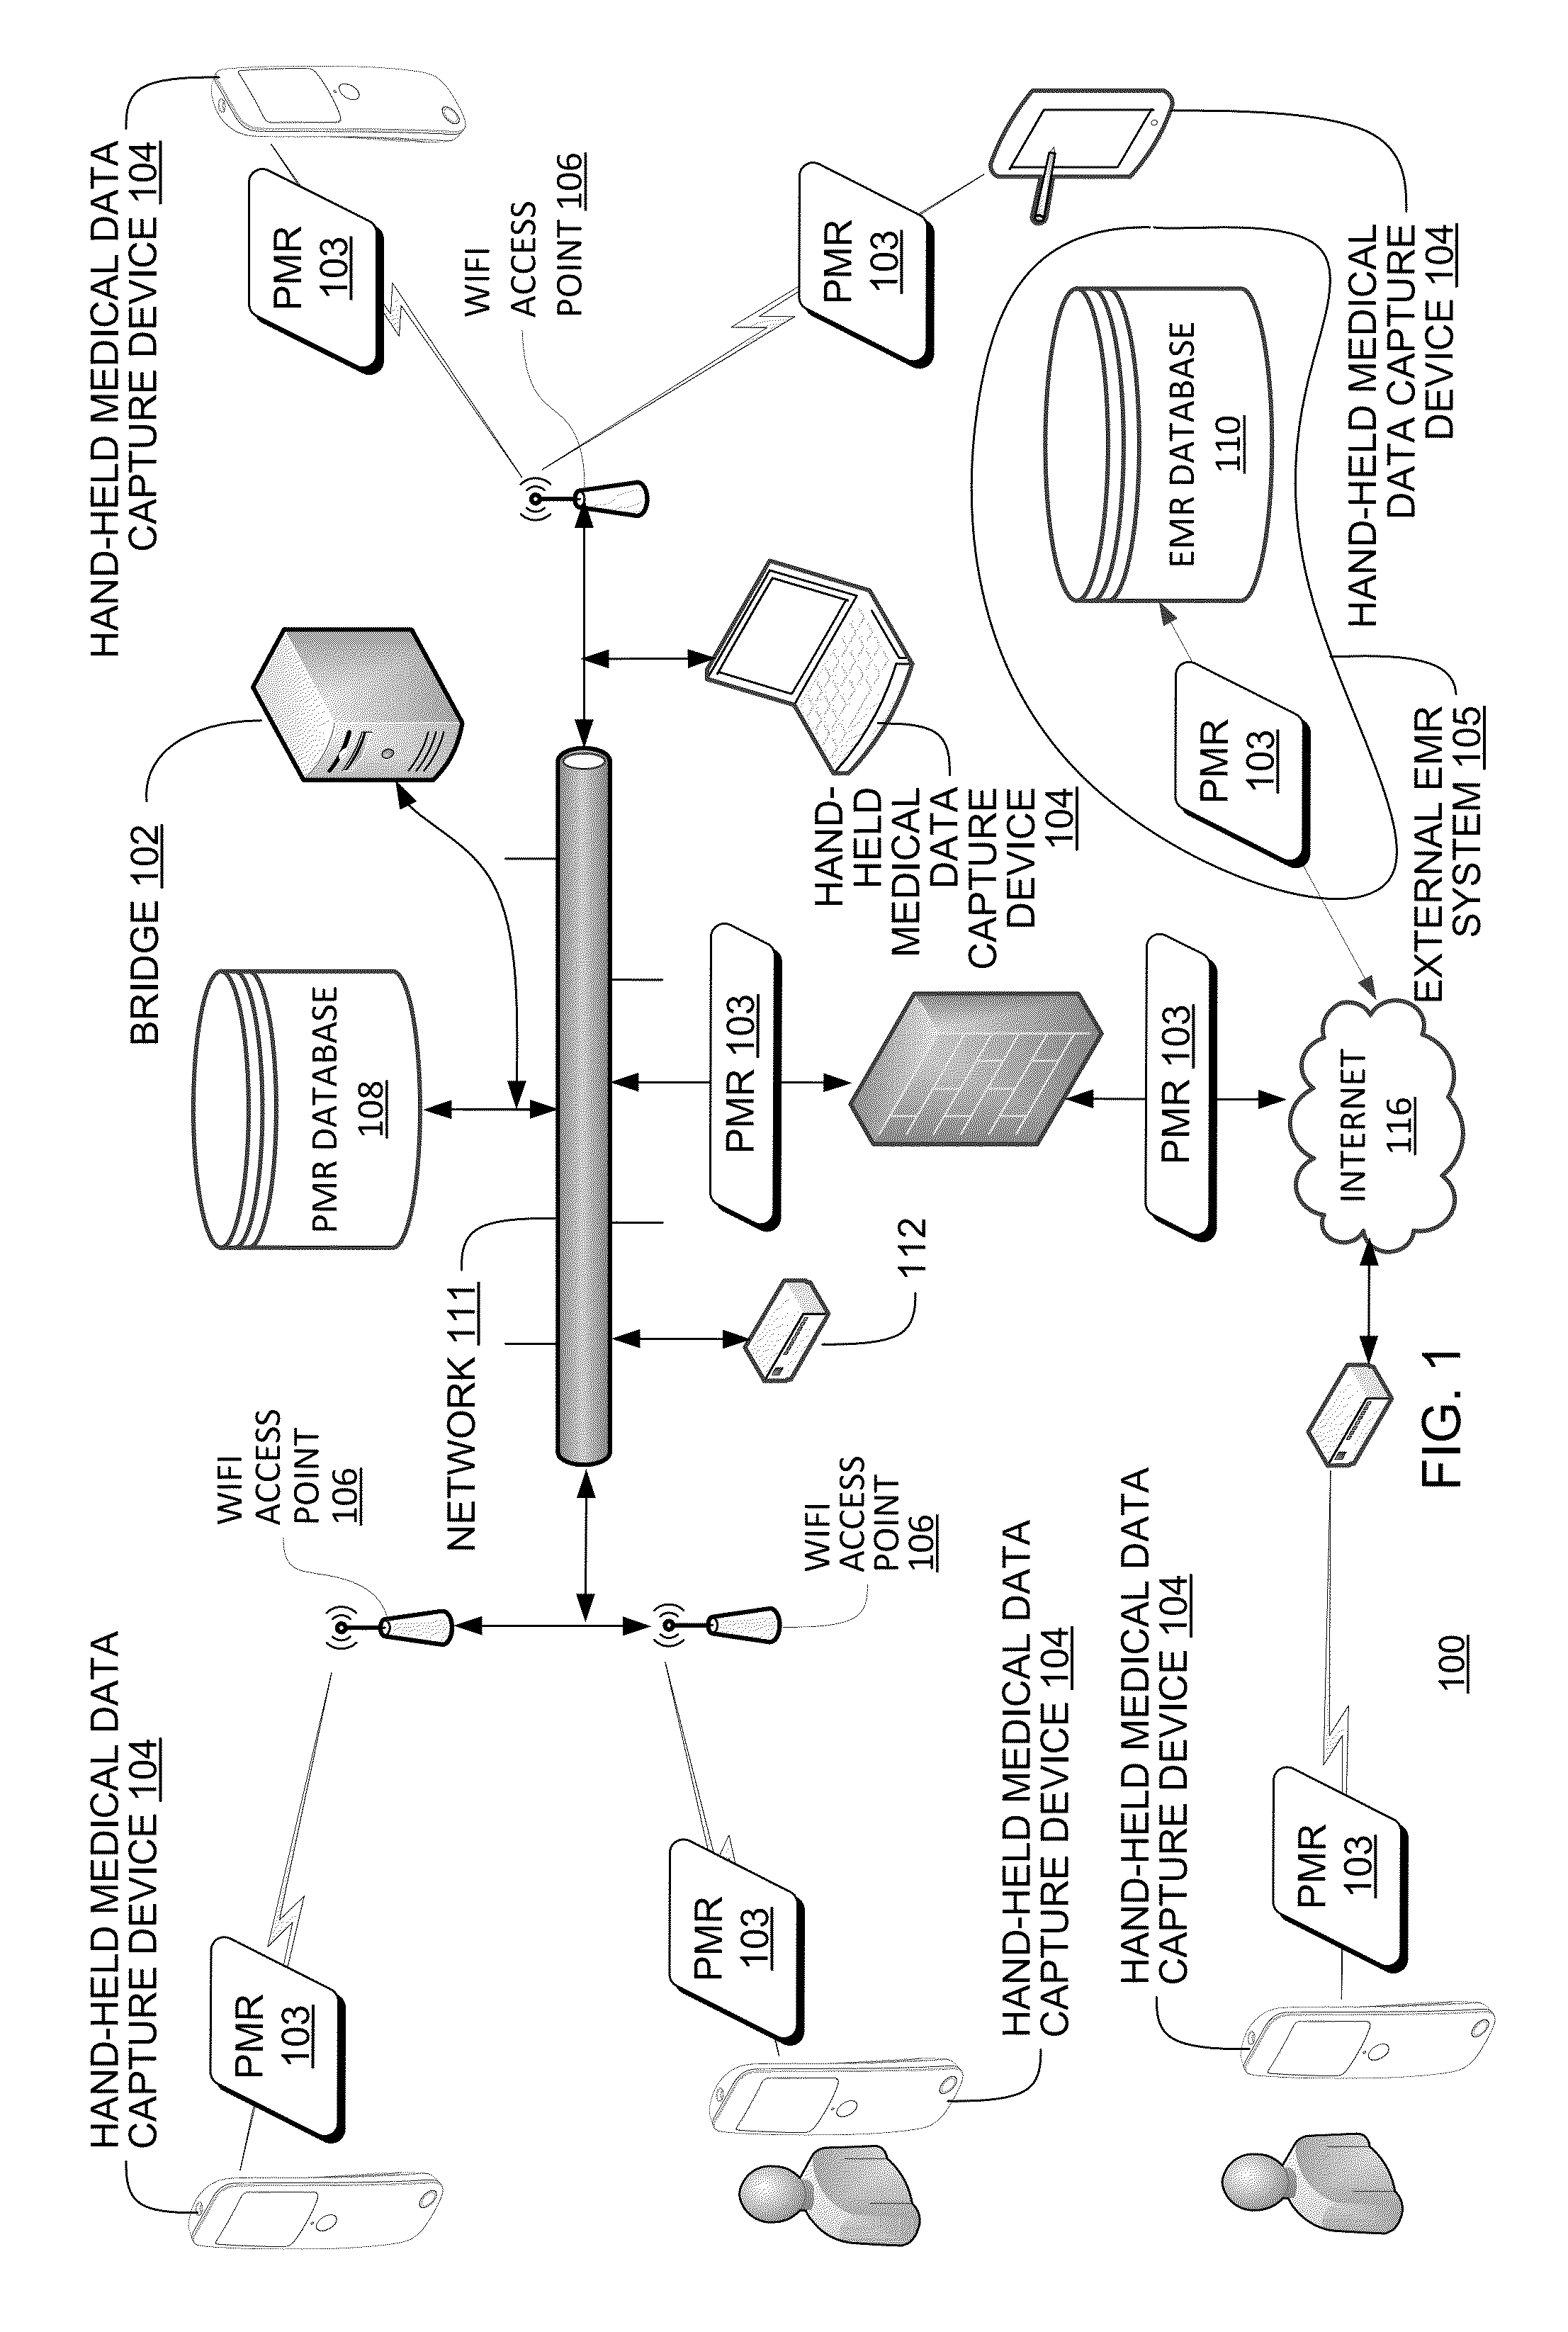 Hand-held medical-data capture-device having a digital infrared sensor with no analog sensor readout ports with no A/D converter and having interoperation with electronic medical record systems via an authenticated communication channel